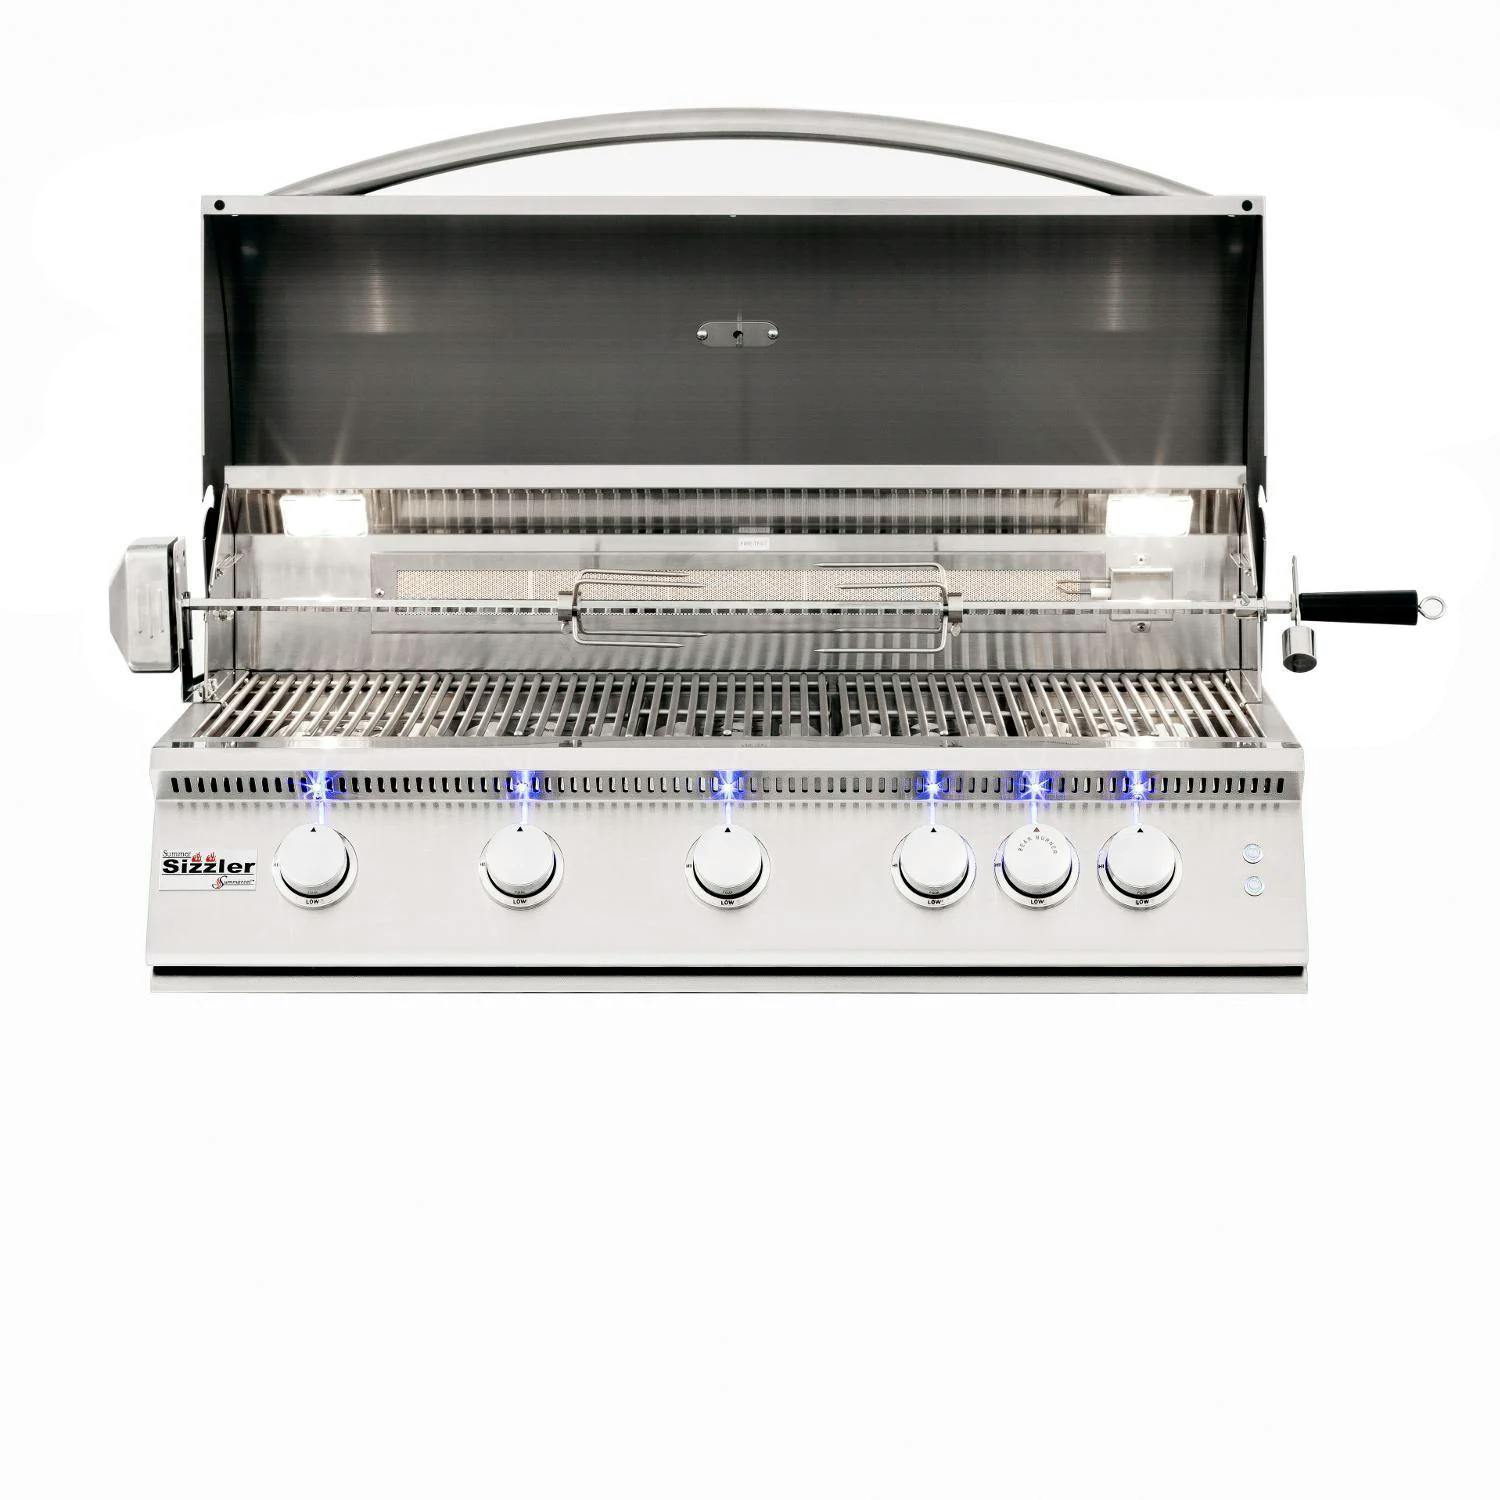 Summerset Sizzler Pro Built-in Gas Grill with Rear Infrared Burner